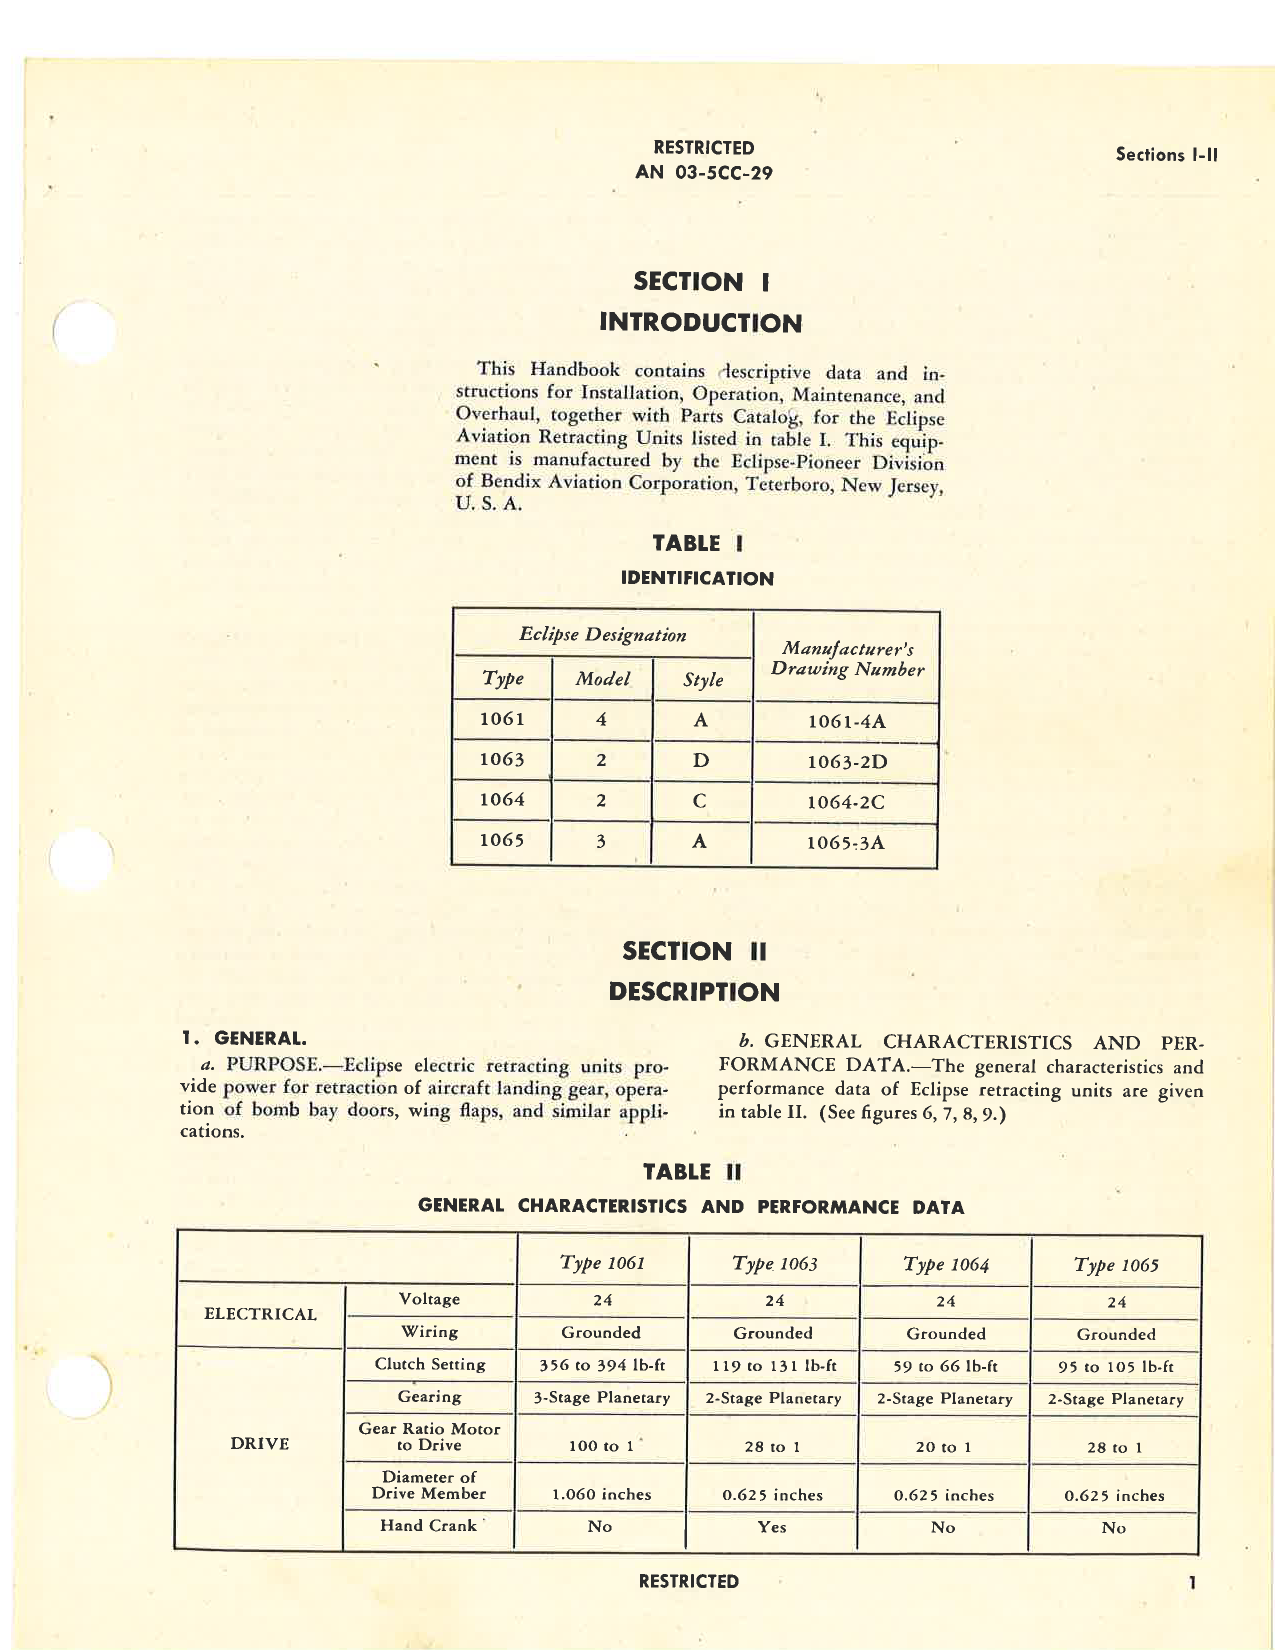 Sample page 7 from AirCorps Library document: Operation, Service & Overhaul Instructions with Parts Catalog for Retracting Motors